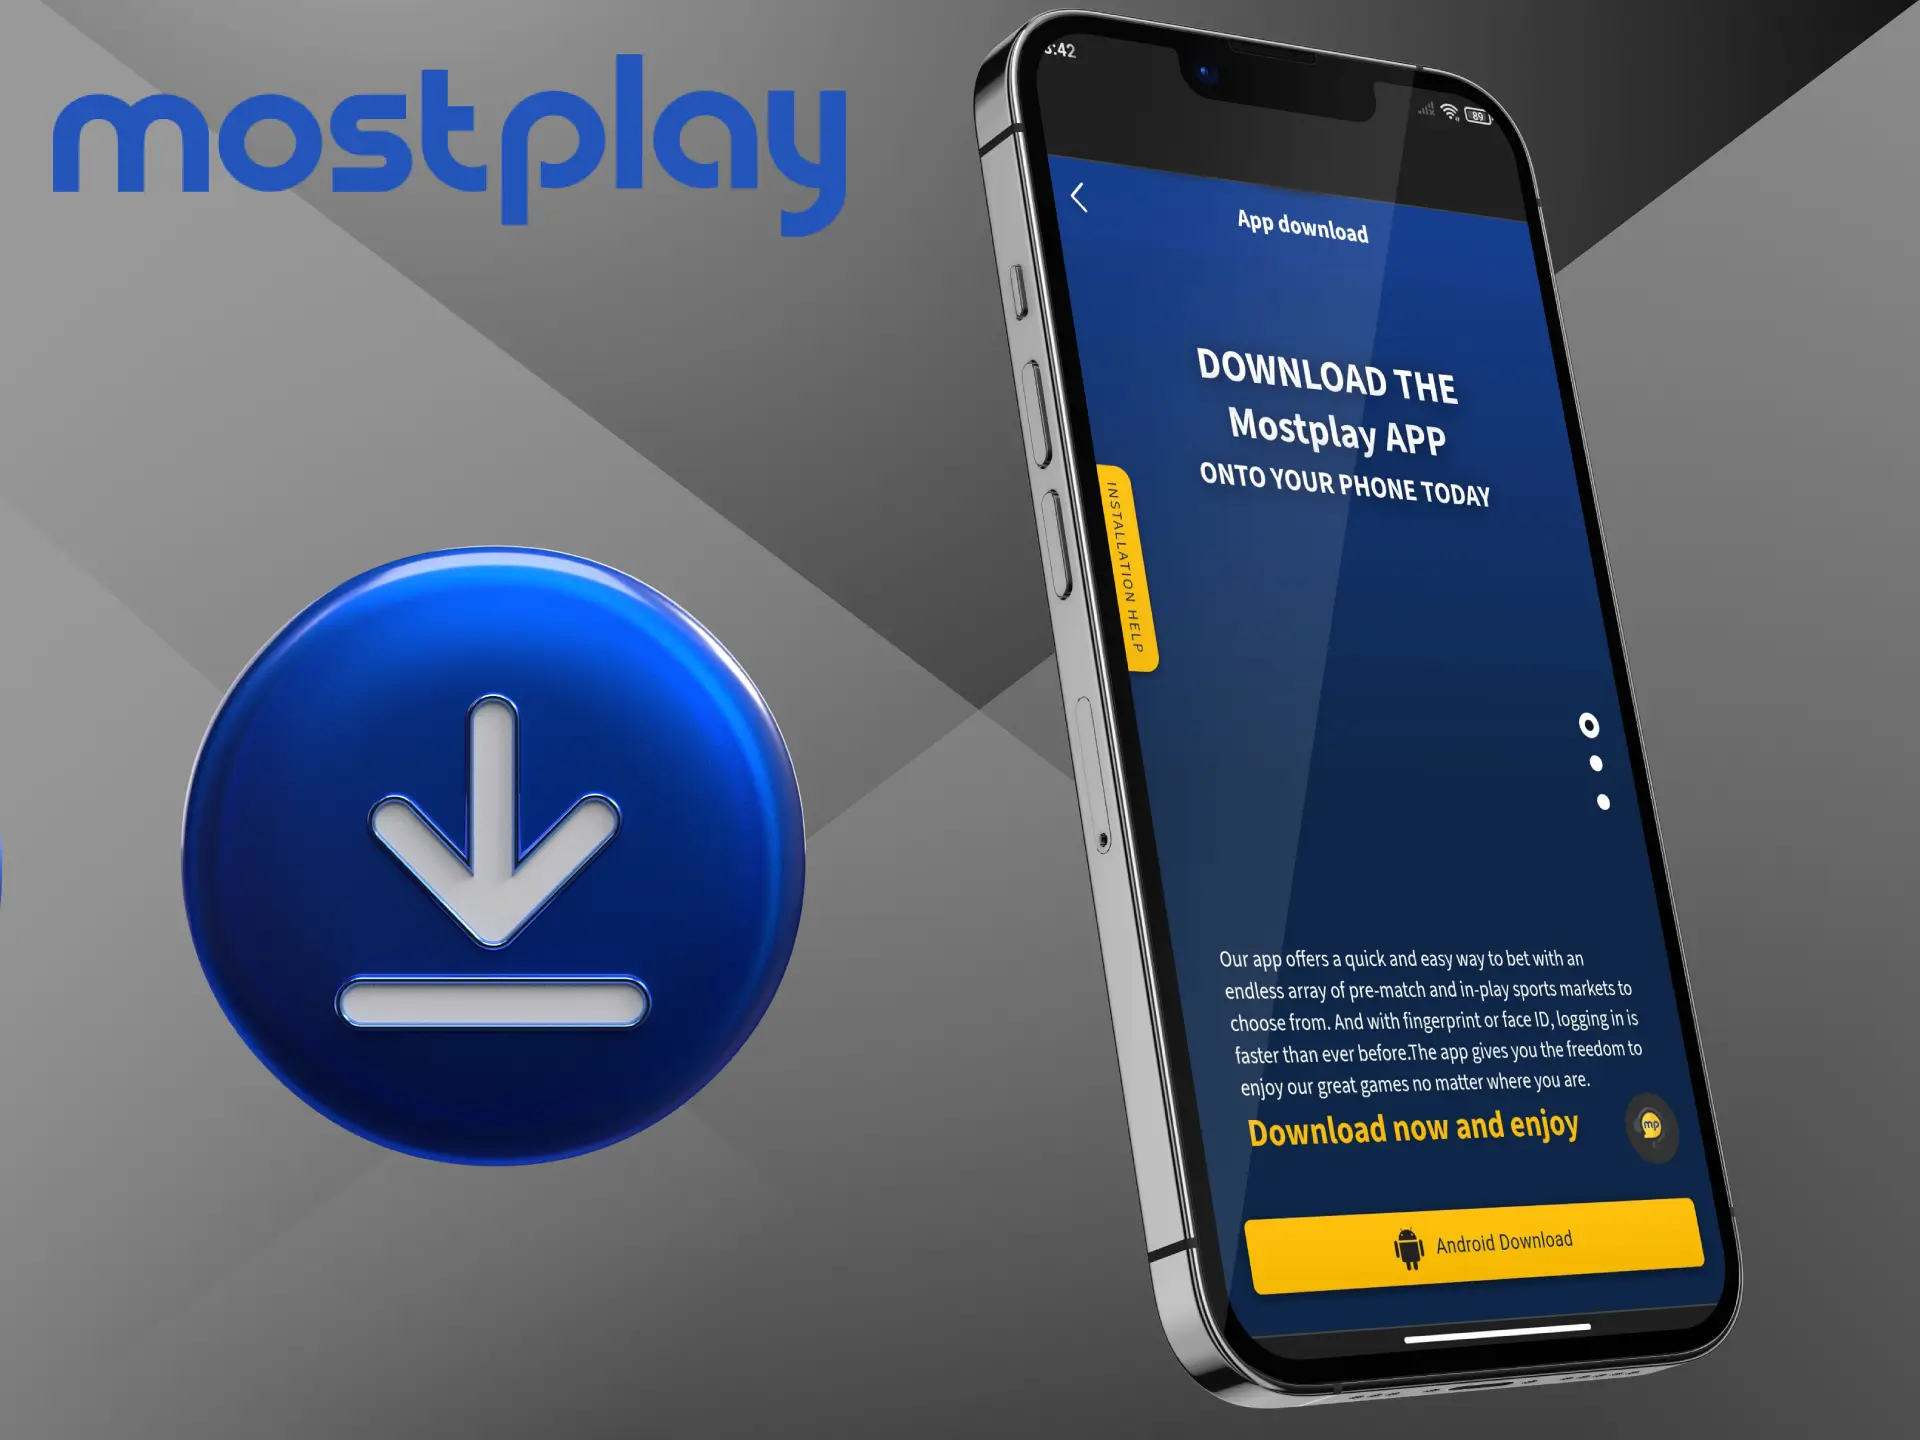 Download the Mostplay app to immerse yourself in the casino world and start earning as an affiliate.